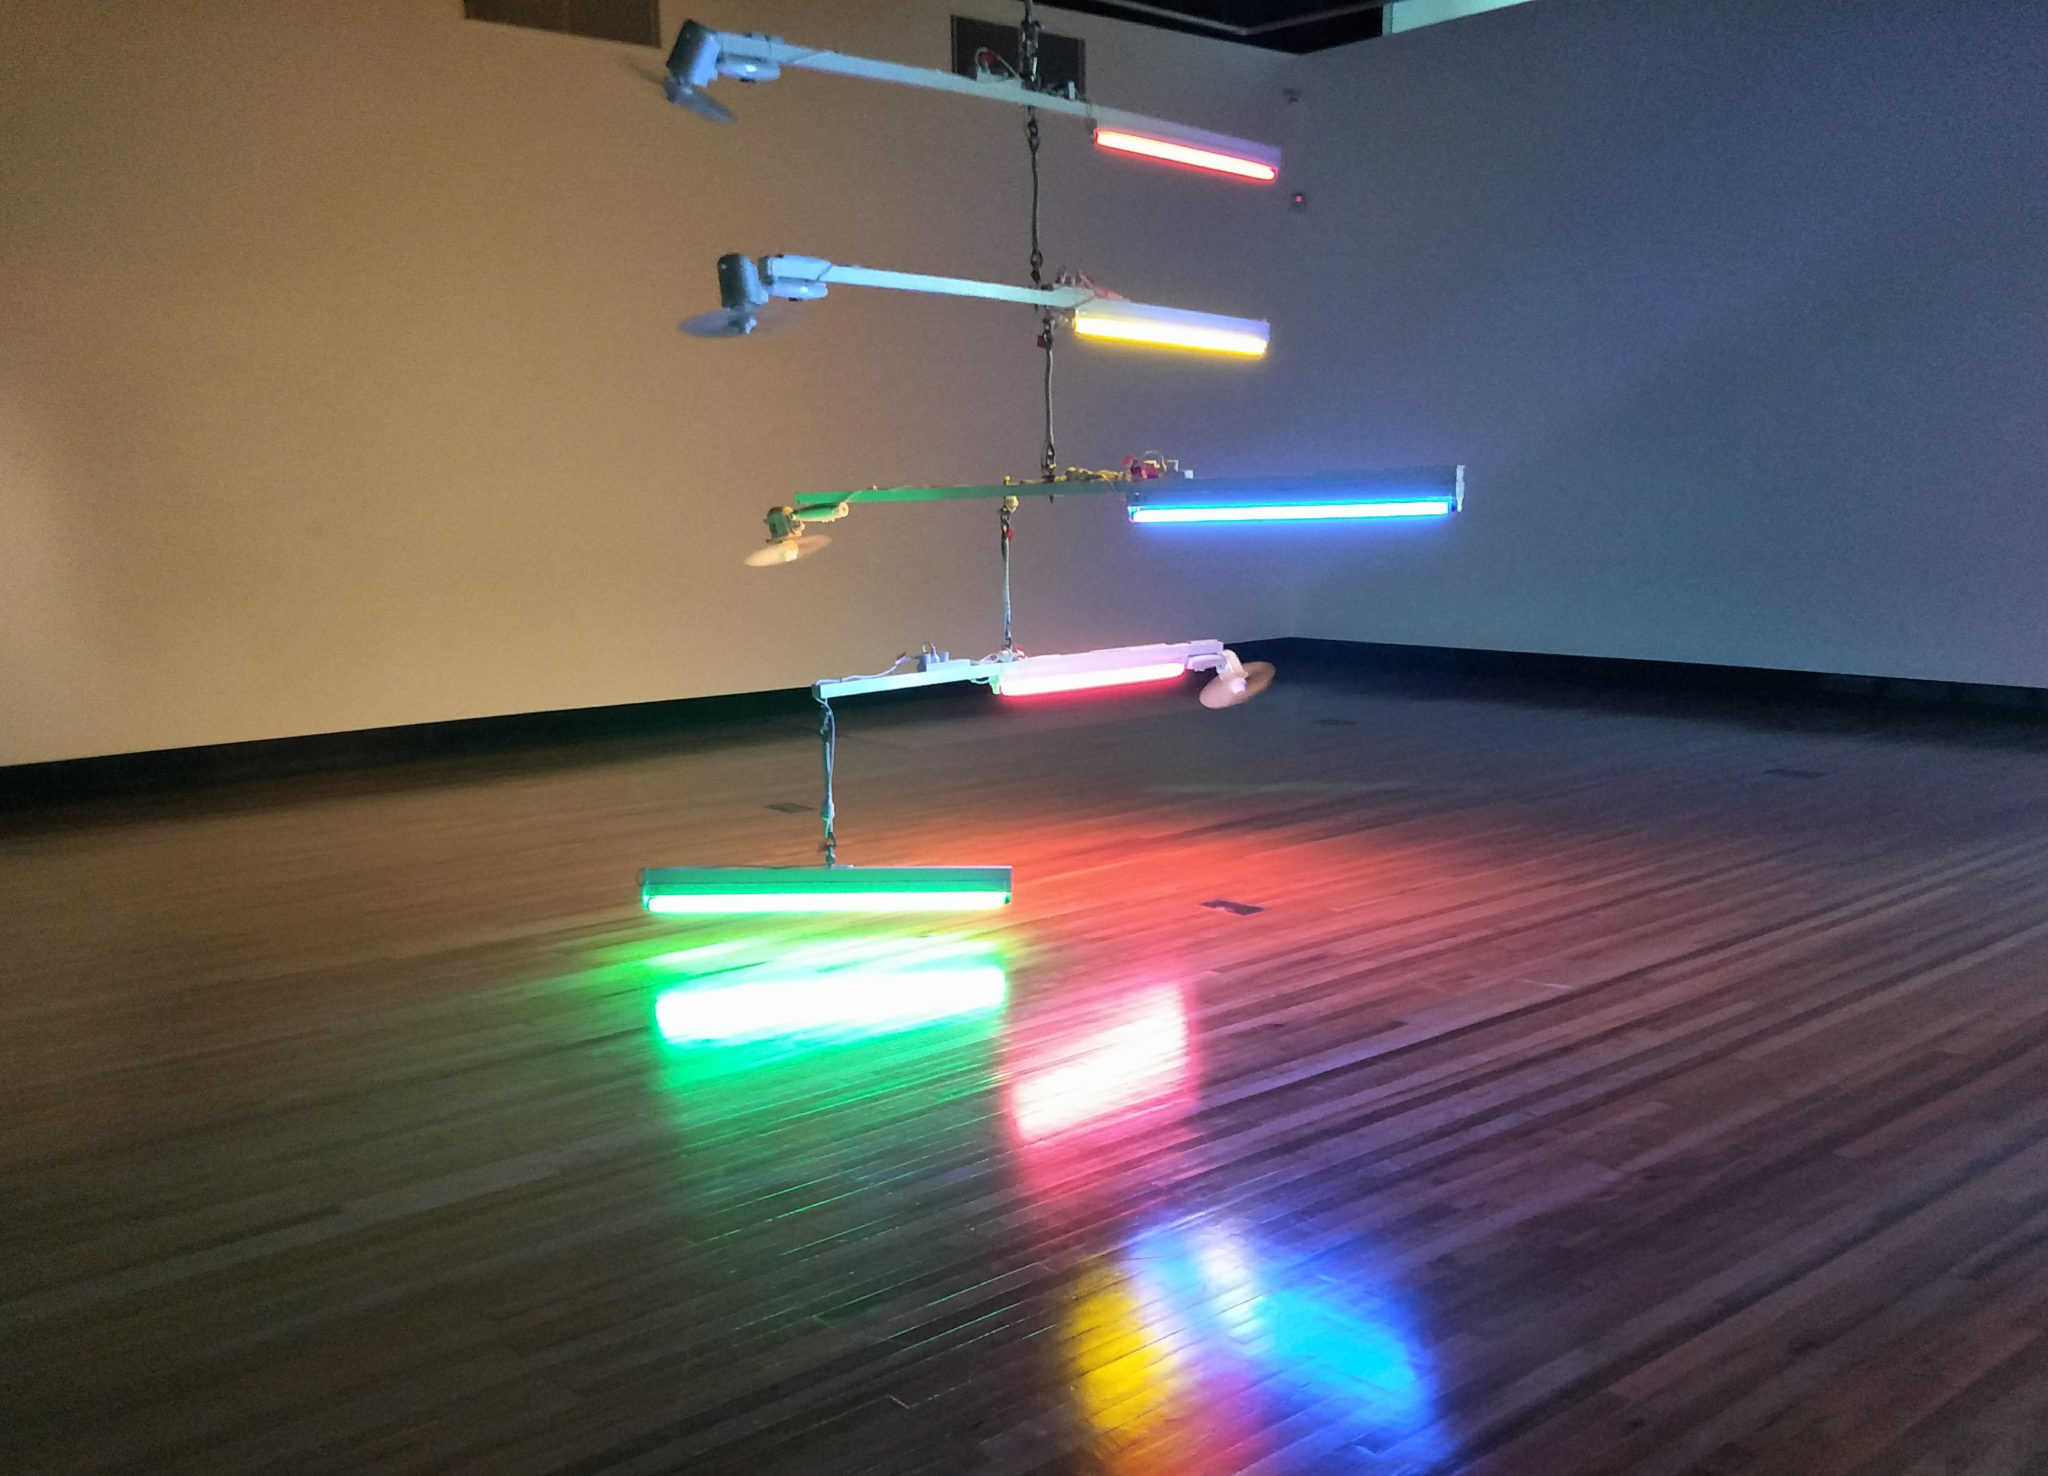 Exhibition documentation of Ross Manning, Spectra XIII, 2017, Fluorescent lights, fans, timber, acrylic paint, steel cable, Courtesy the artist. Shown gallery 1, Latrobe Regional Gallery, 2019.